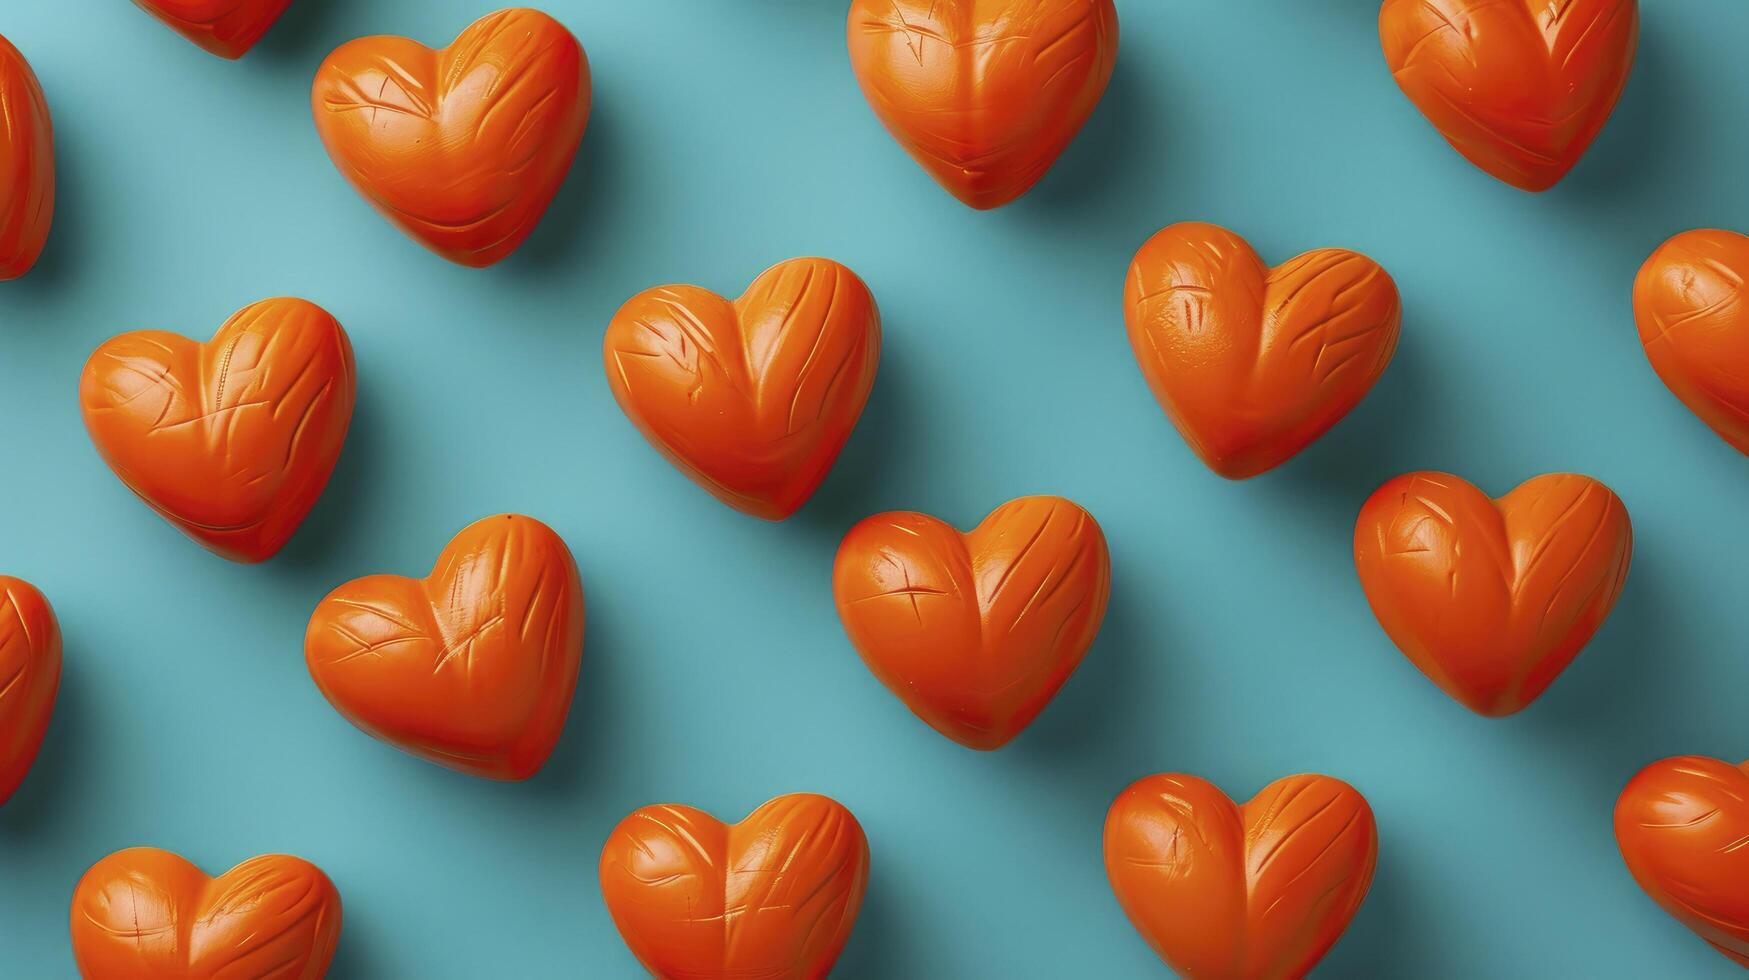 AI generated Repeating tile pattern of orange lOVE volumetric equally spaced hearts on a turquoise background photo